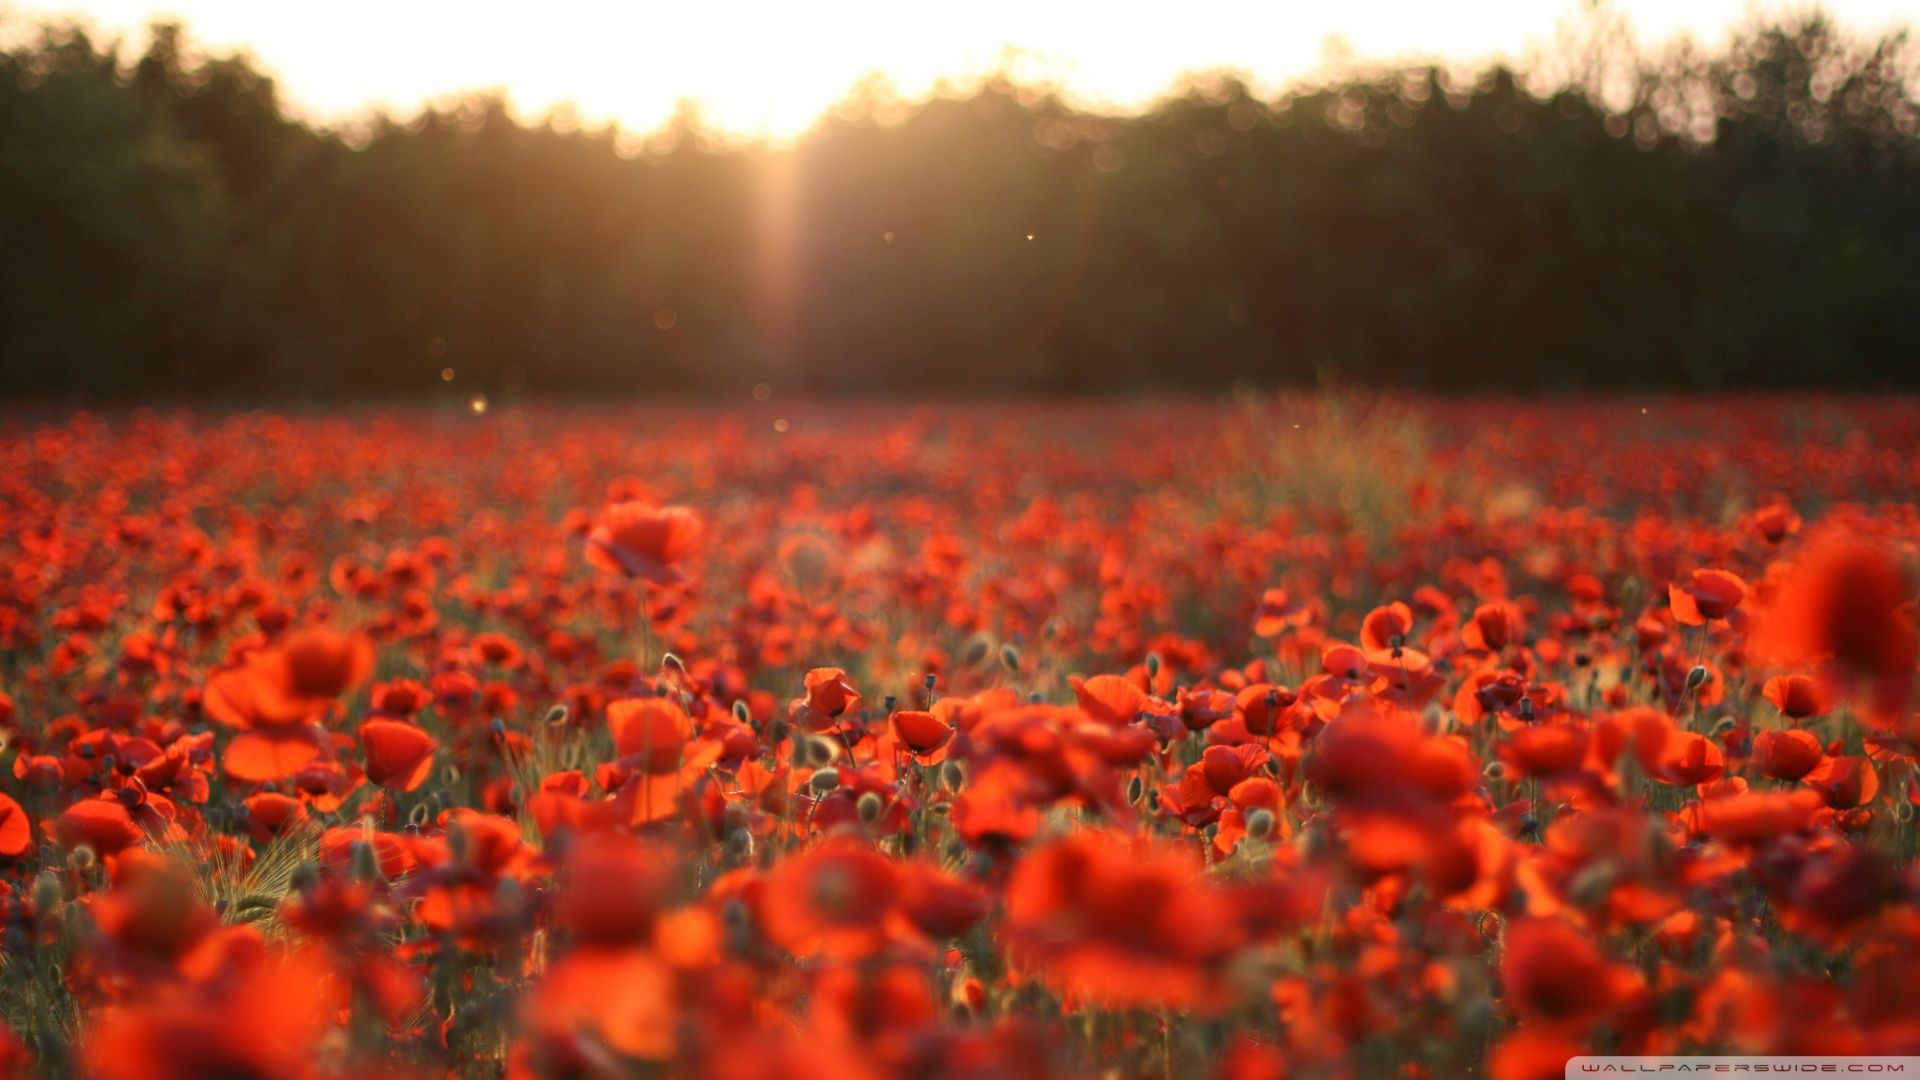 Poppies Meadow Wallpaper 1920x1080 Poppies, Meadow | POPPIES ...